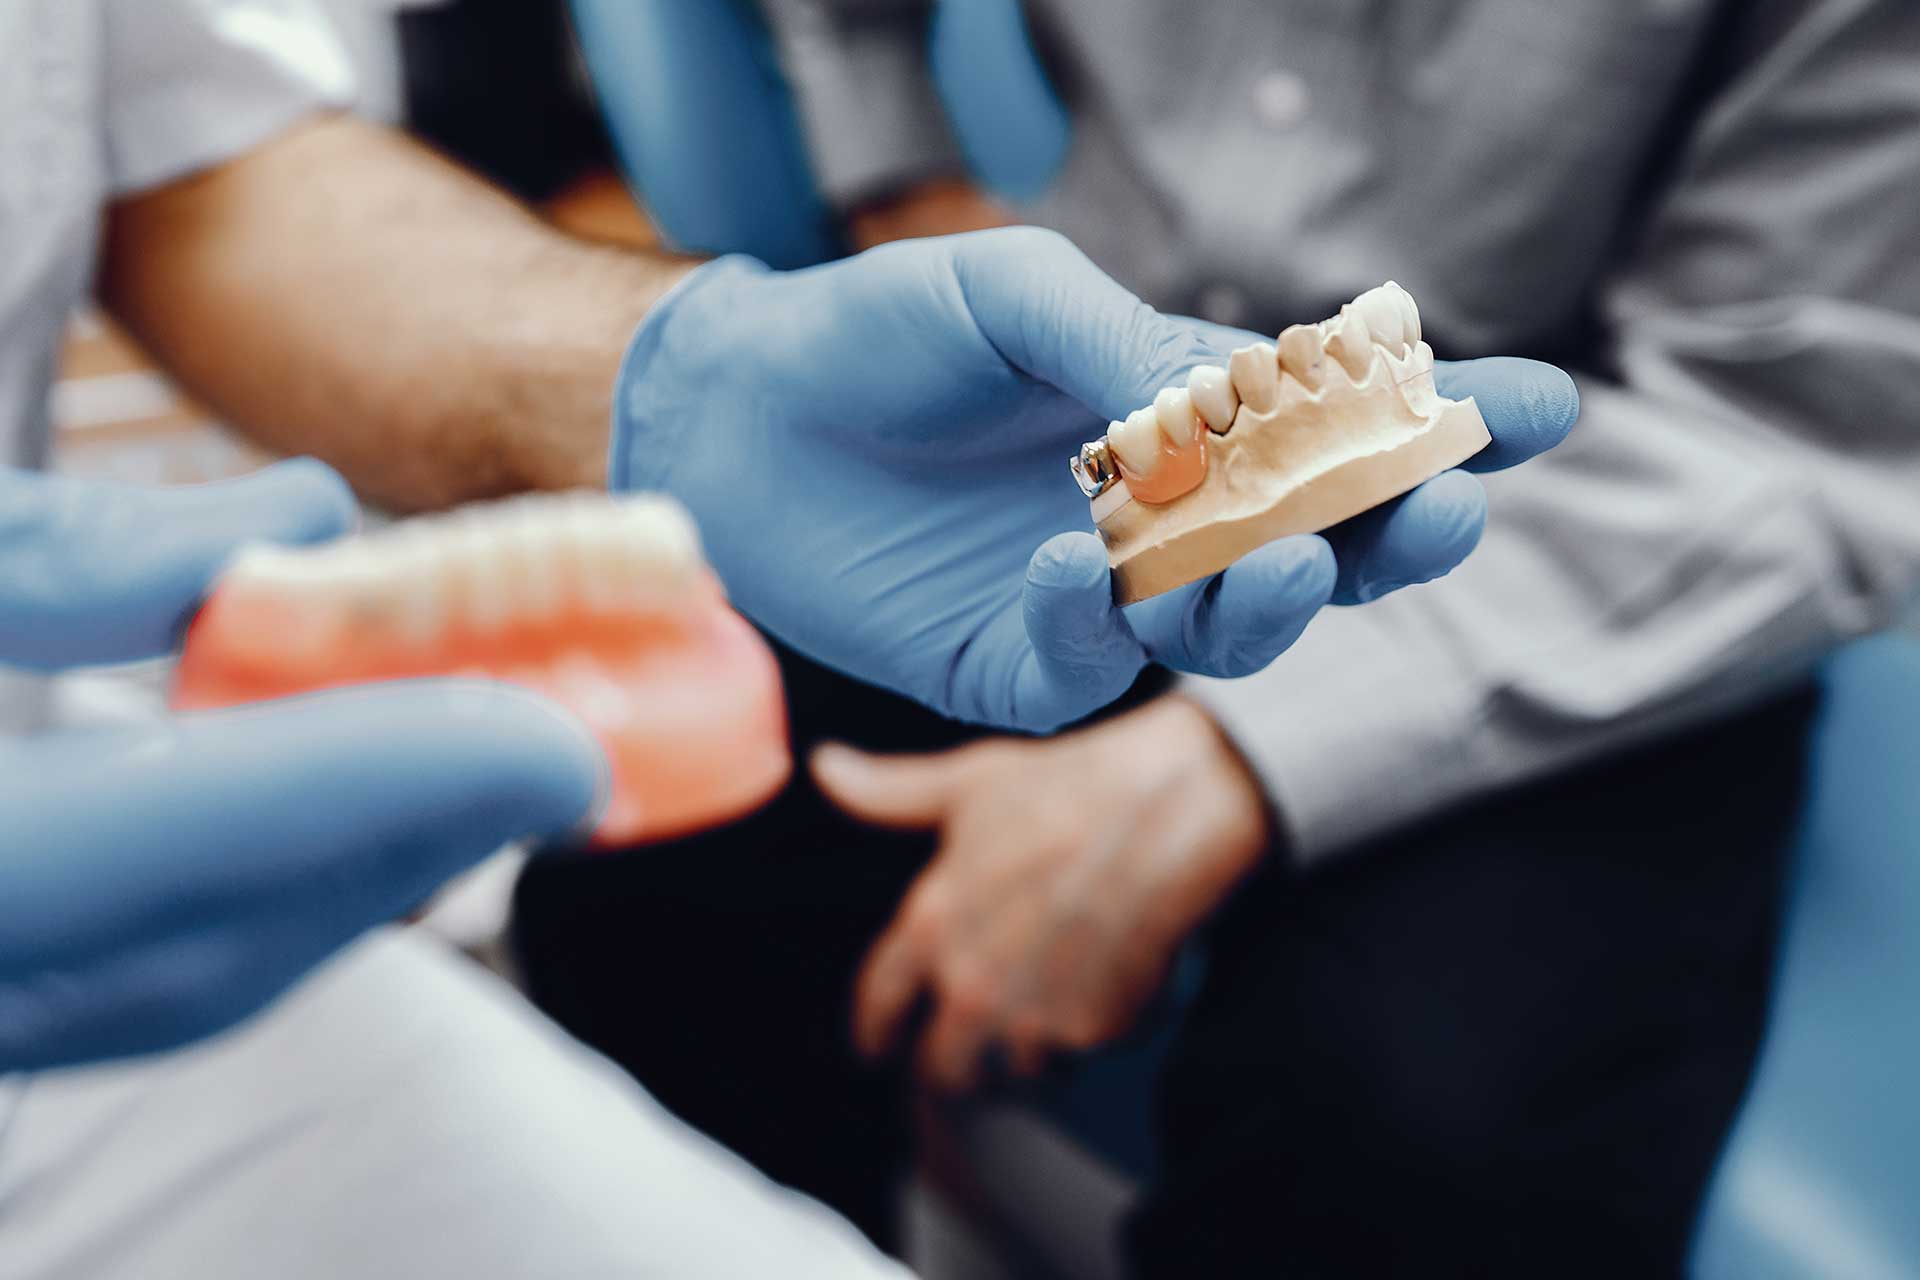 Dental Prostheses: Types, Application, and Essential Care